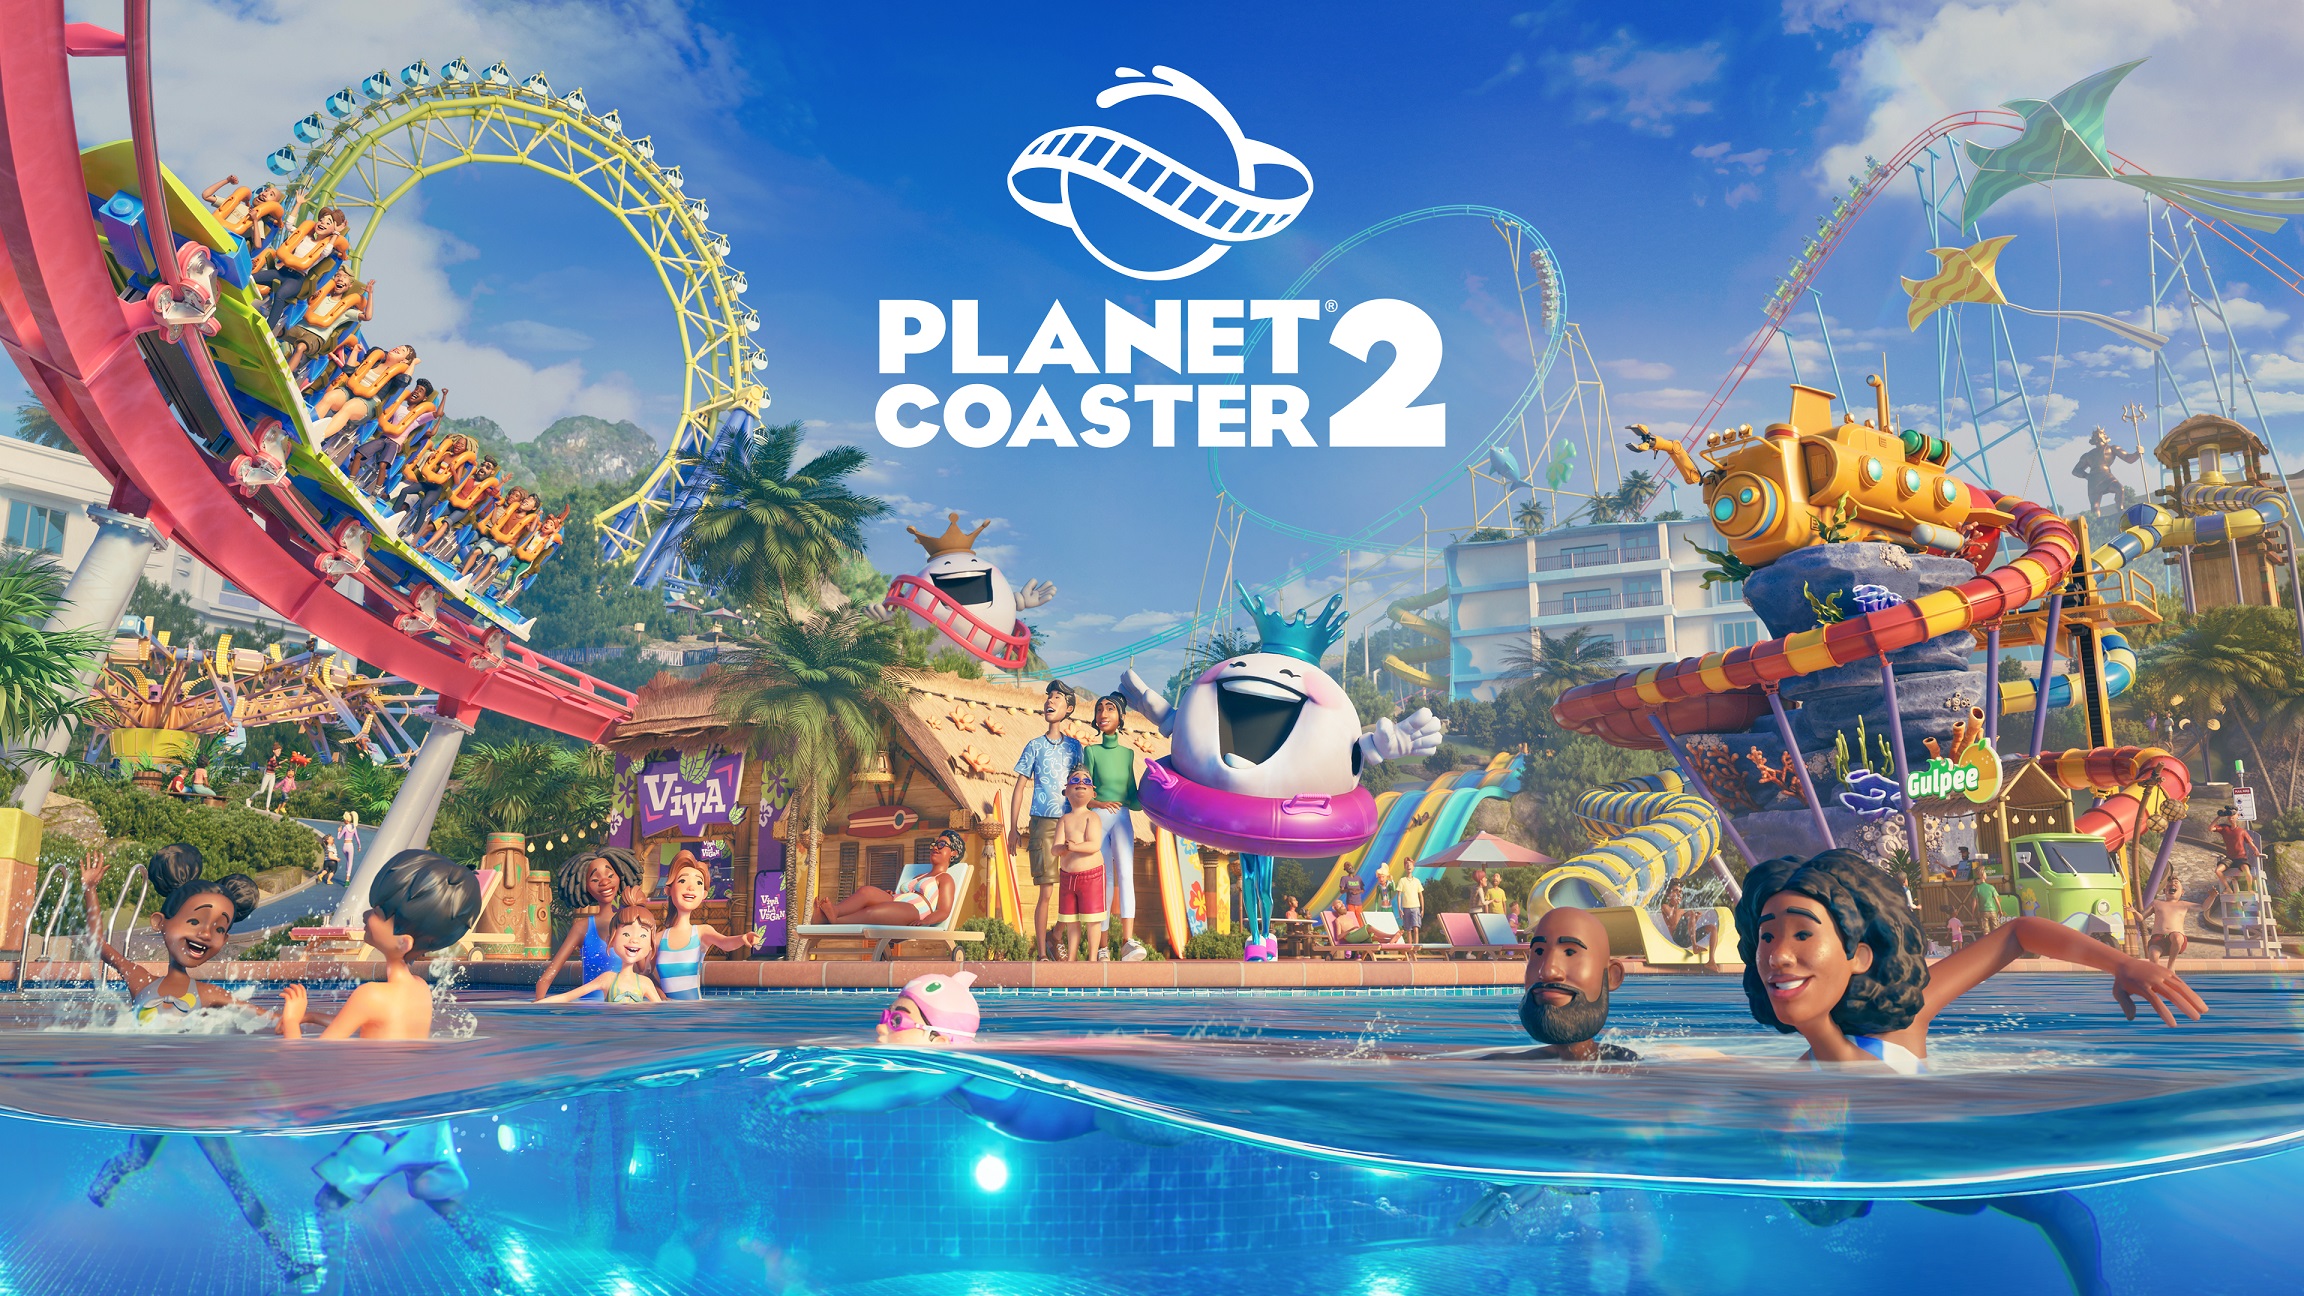 Planet Coaster 2 adds water parks to the sim sequel